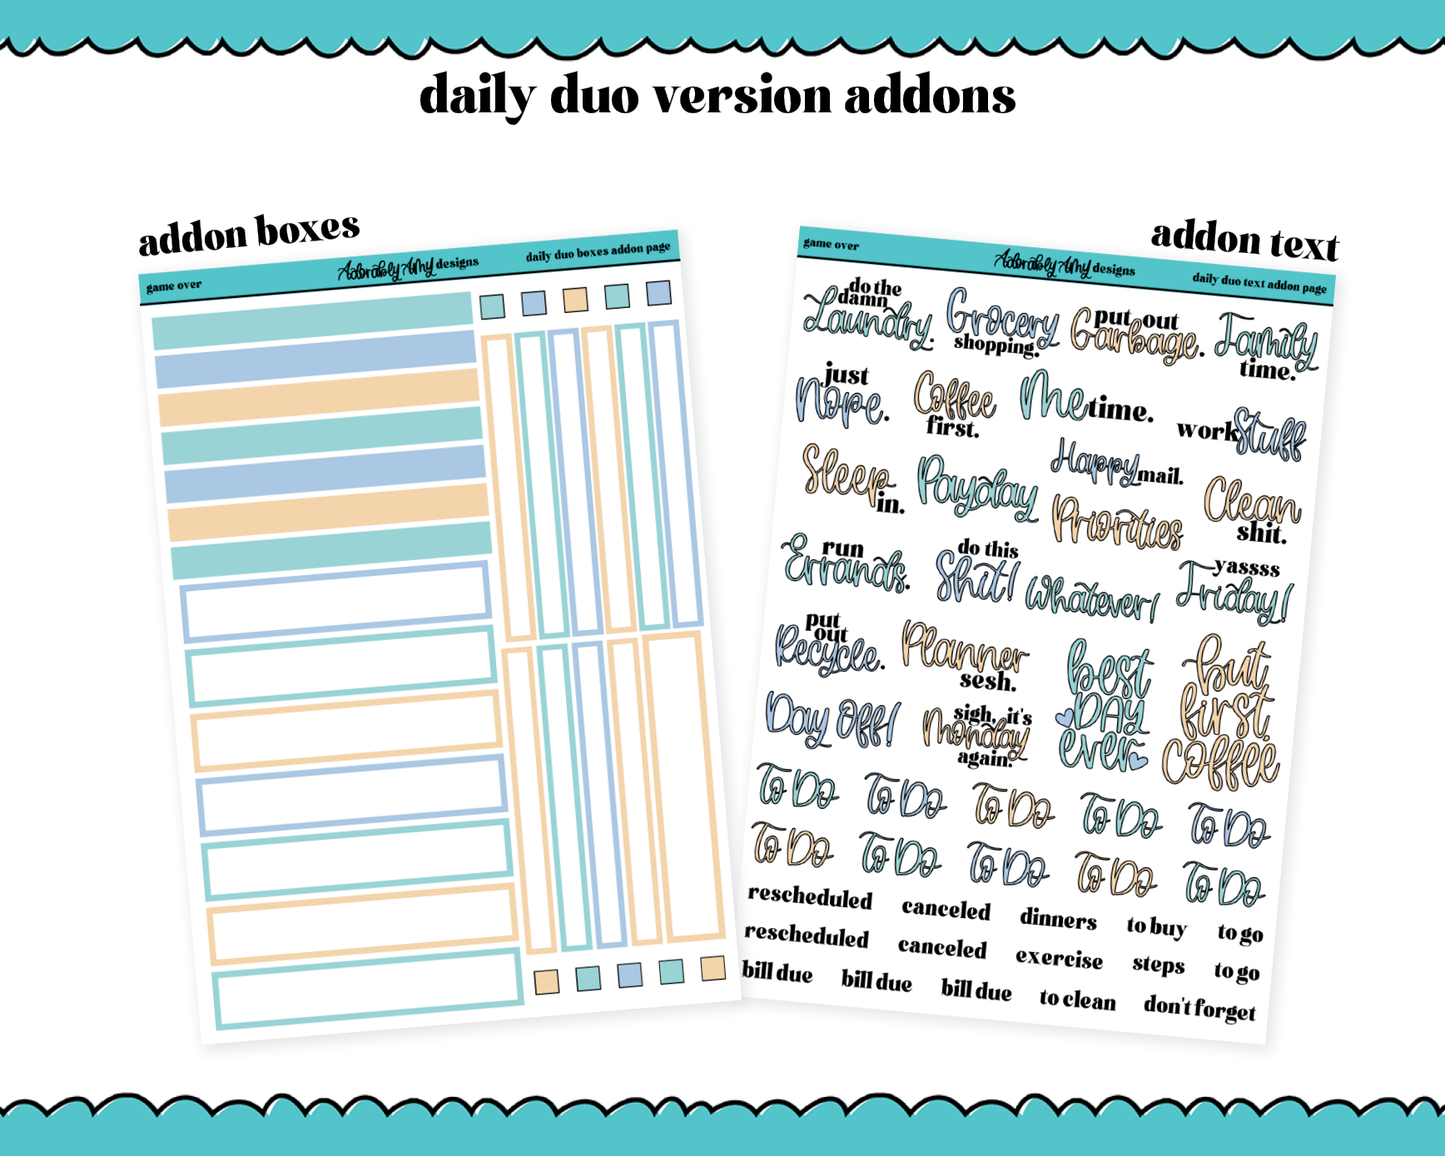 Daily Duo Game Over Watercolor Weekly Planner Sticker Kit for Daily Duo Planner